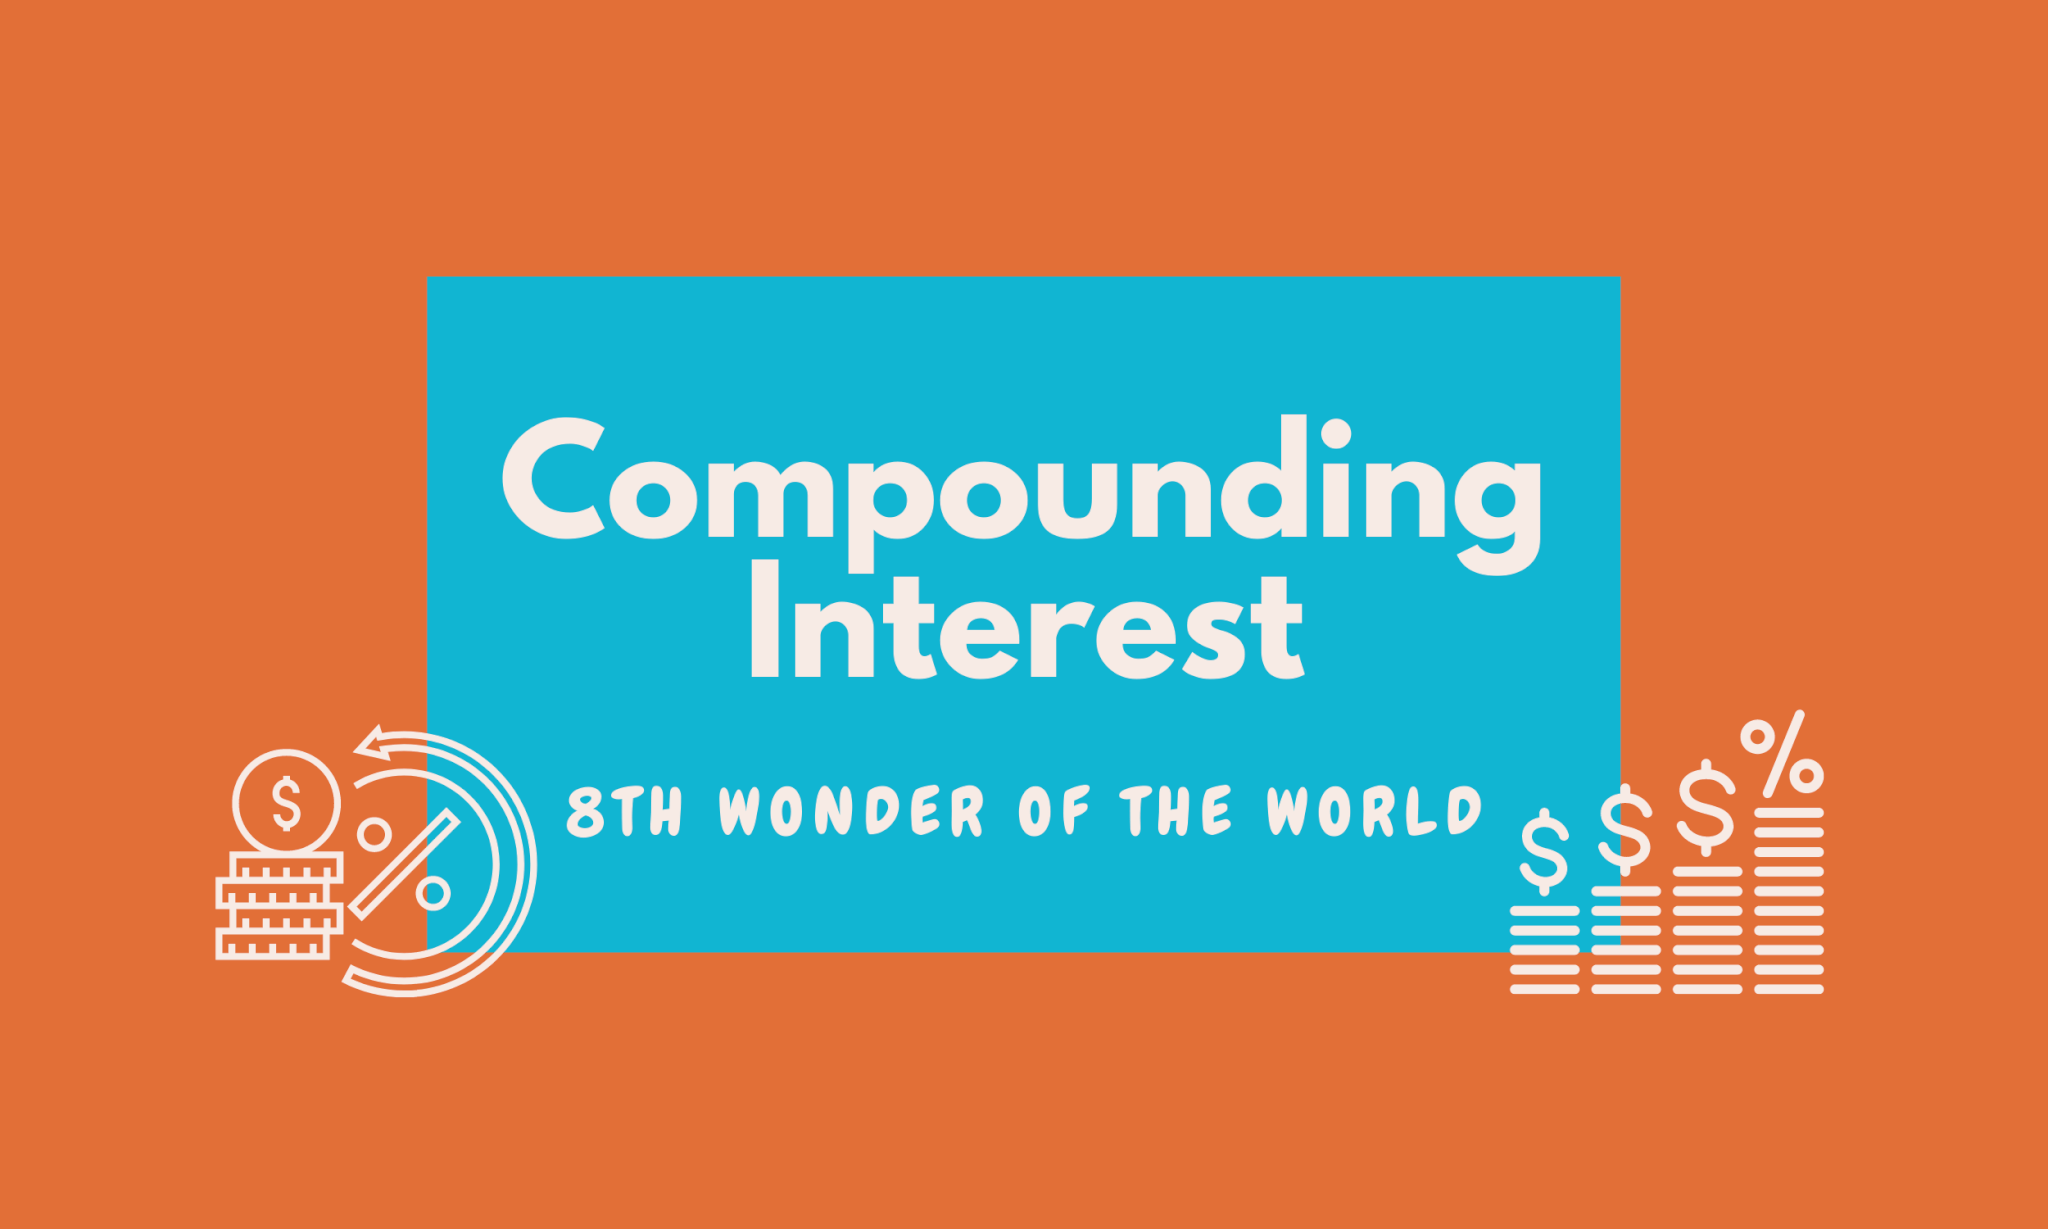 Compounding Interest: 8th Wonder of the World